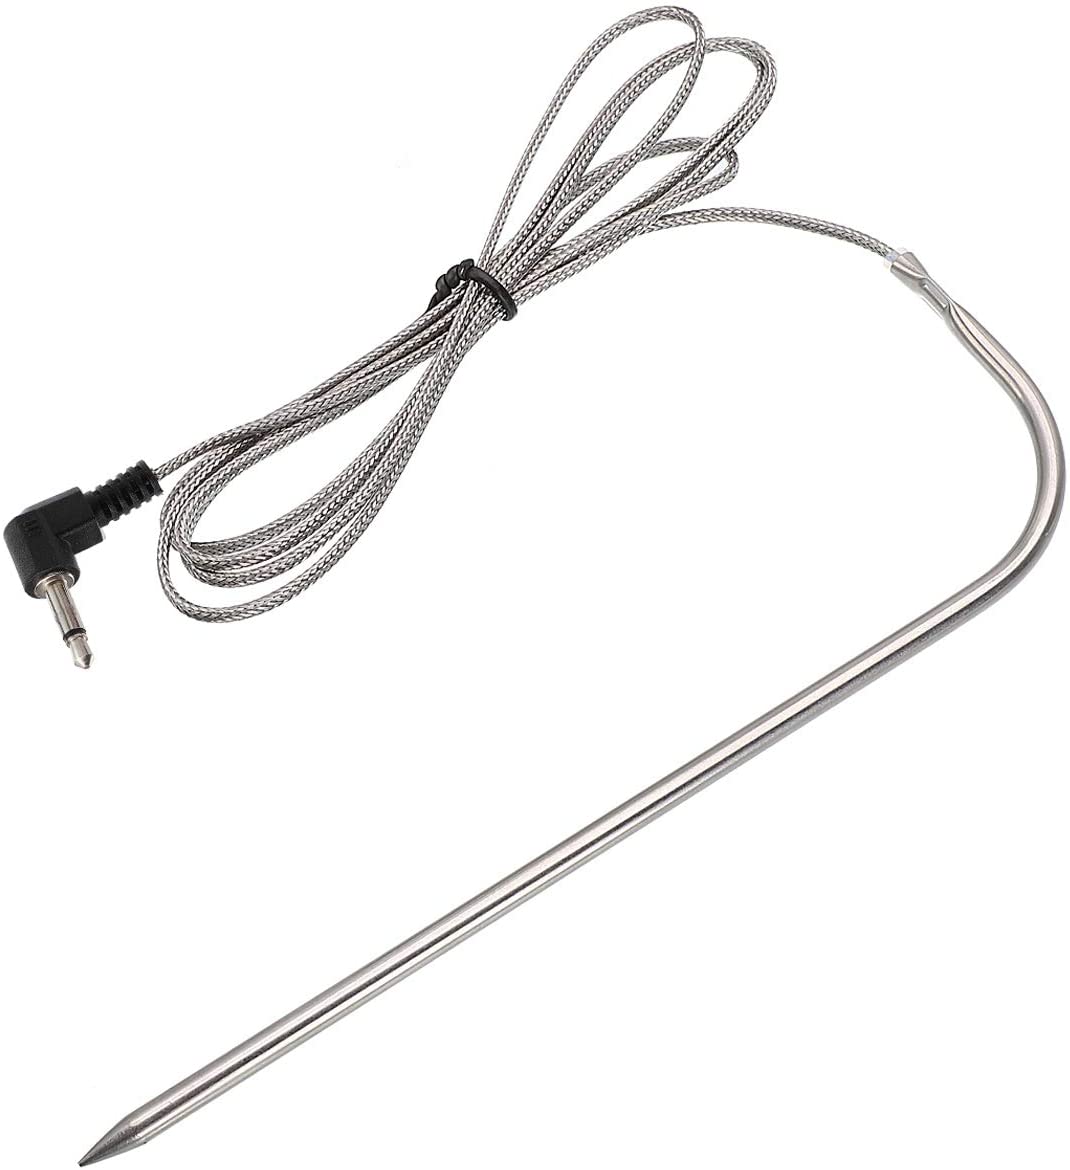 High Precision Pt1000 Class B Cooking Thermometer Meat Temperature Probe  For Pellet Grill - Buy High Precision Pt1000 Class B Cooking Thermometer  Meat Temperature Probe For Pellet Grill Product on